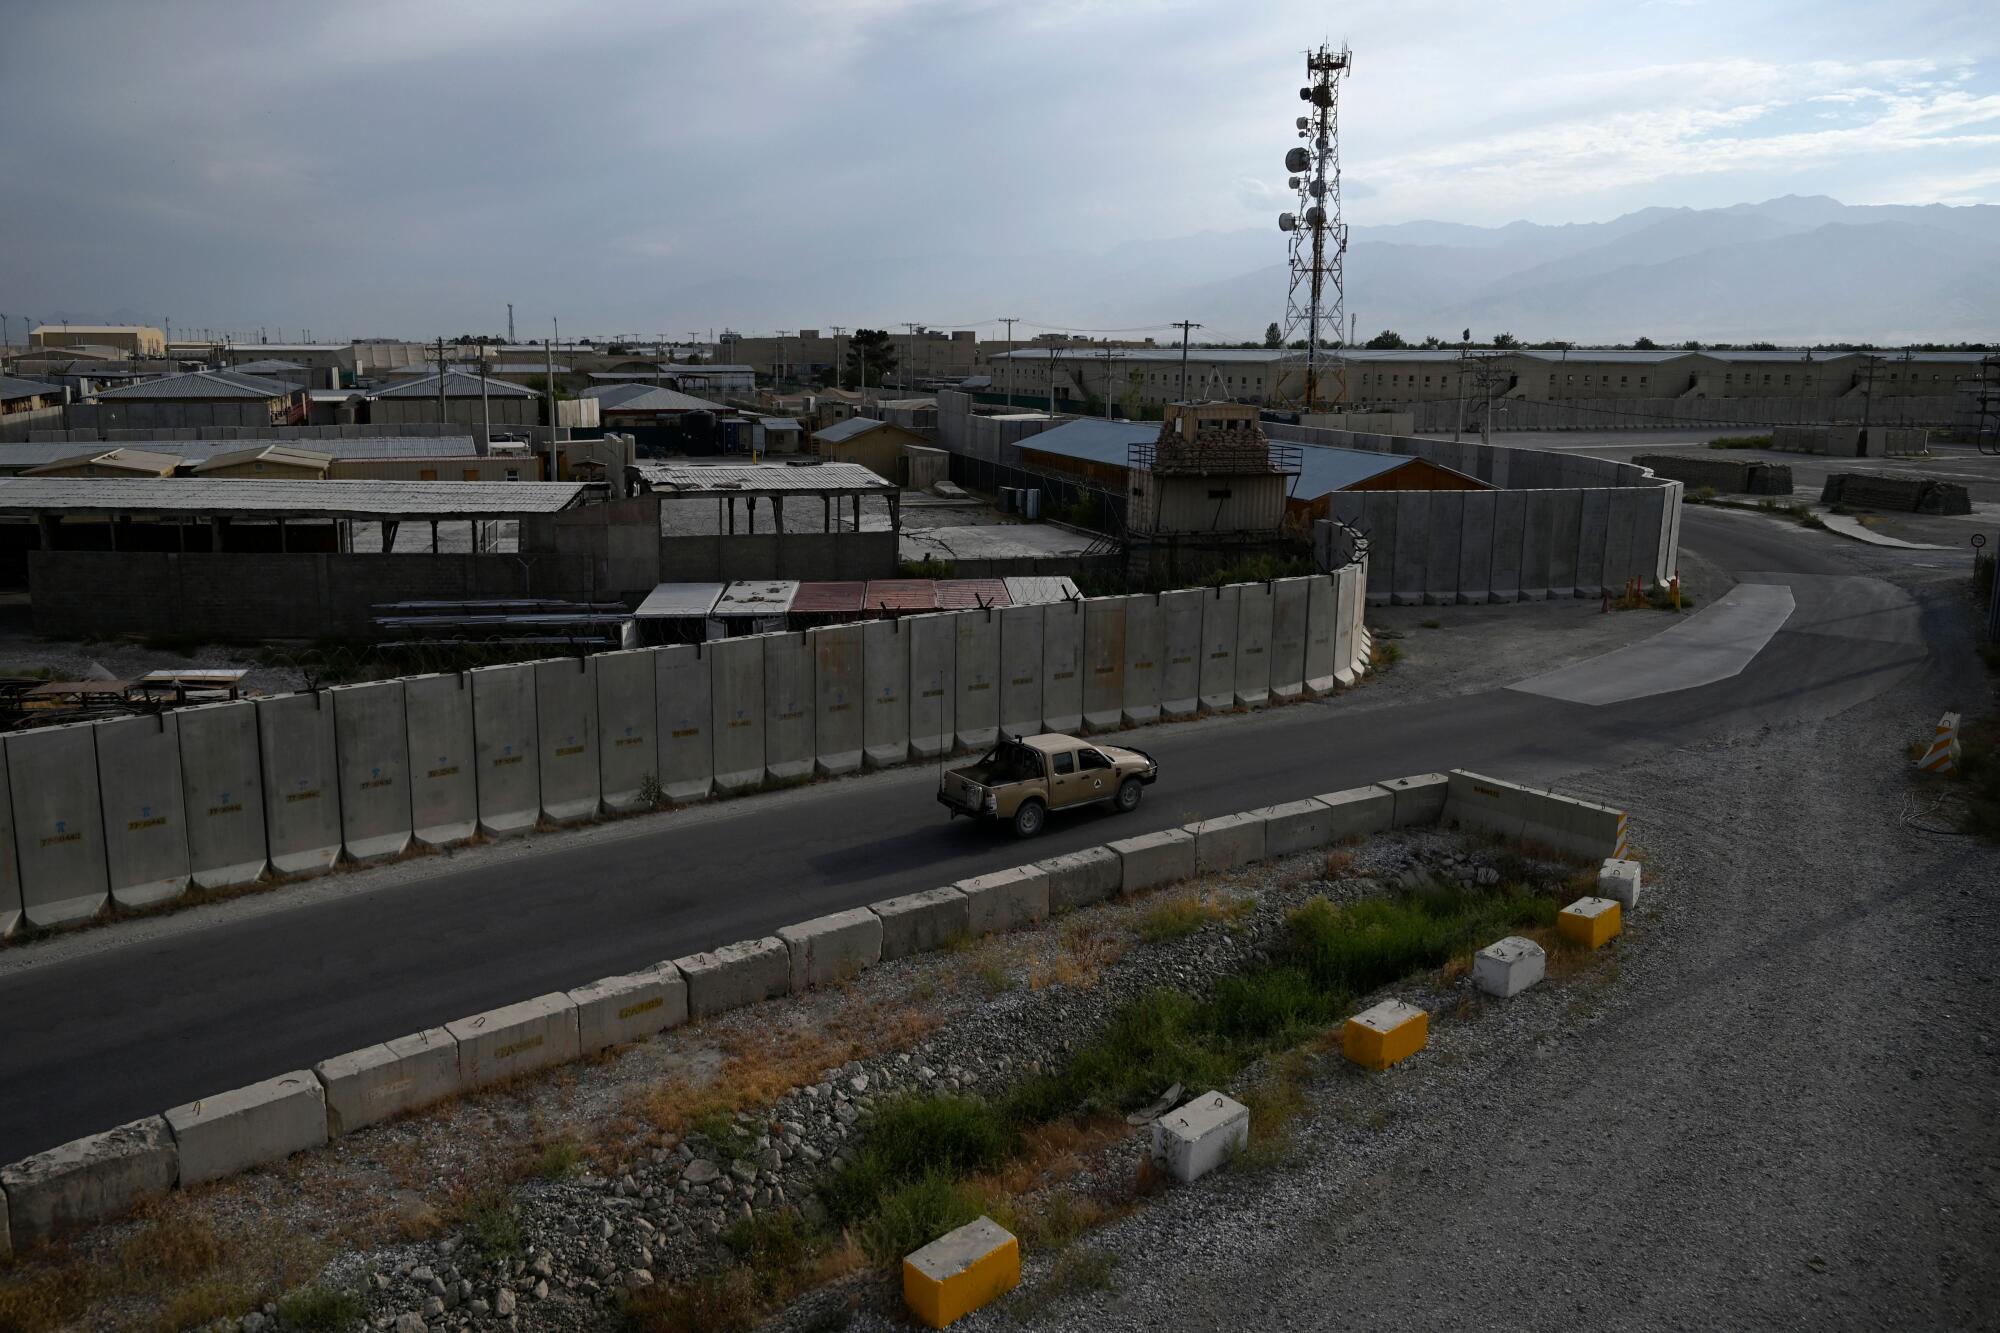 Fencing, buildings and roads at the Bagram air base 